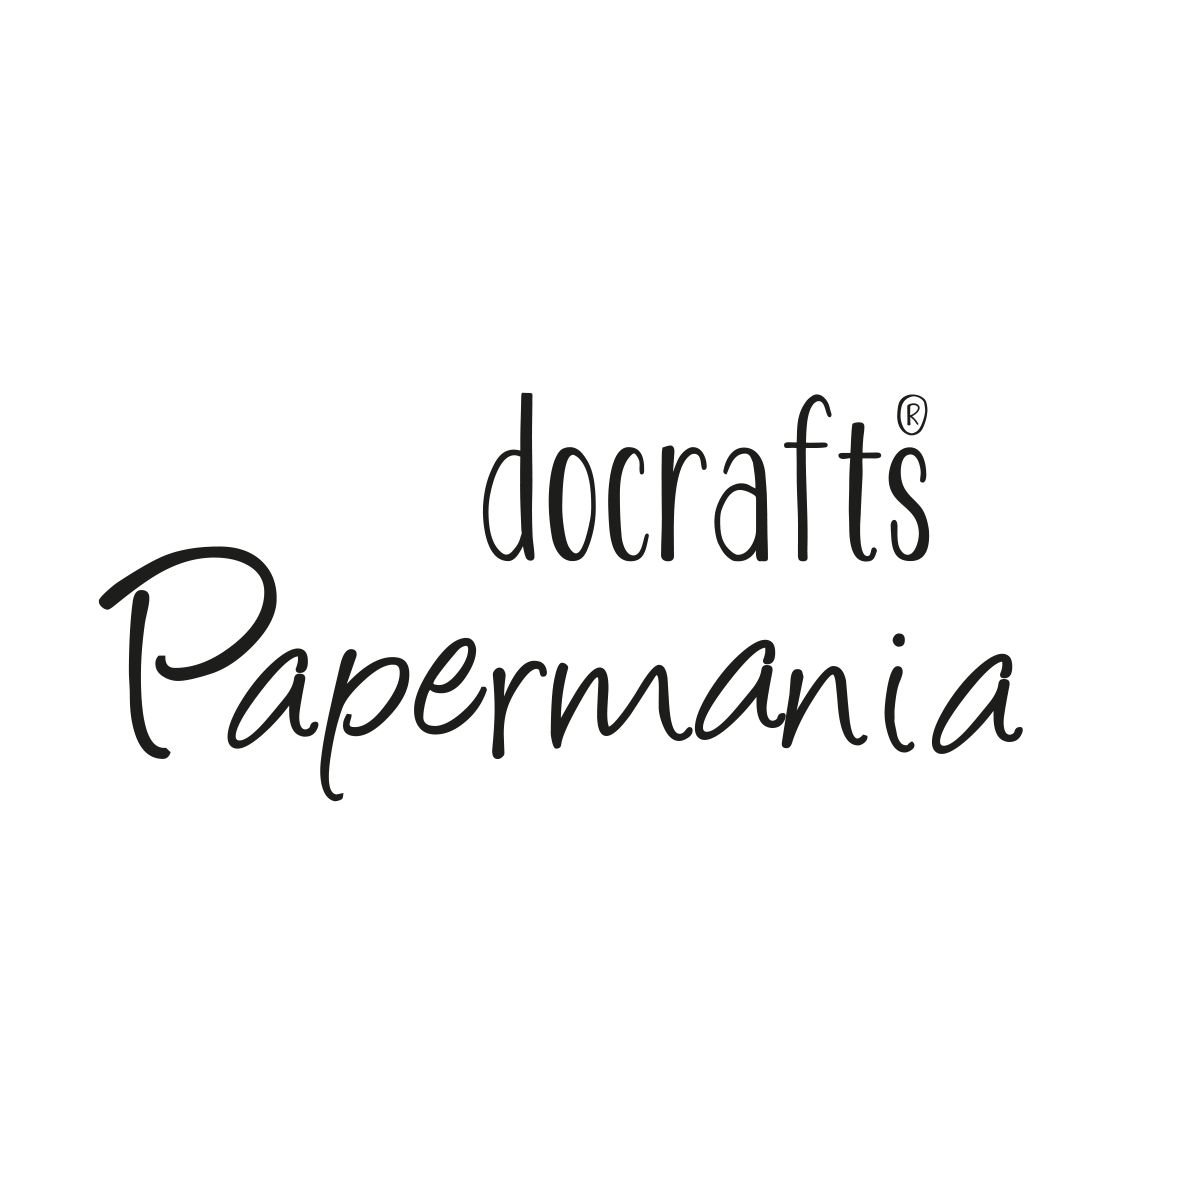 Papermania Logo.png